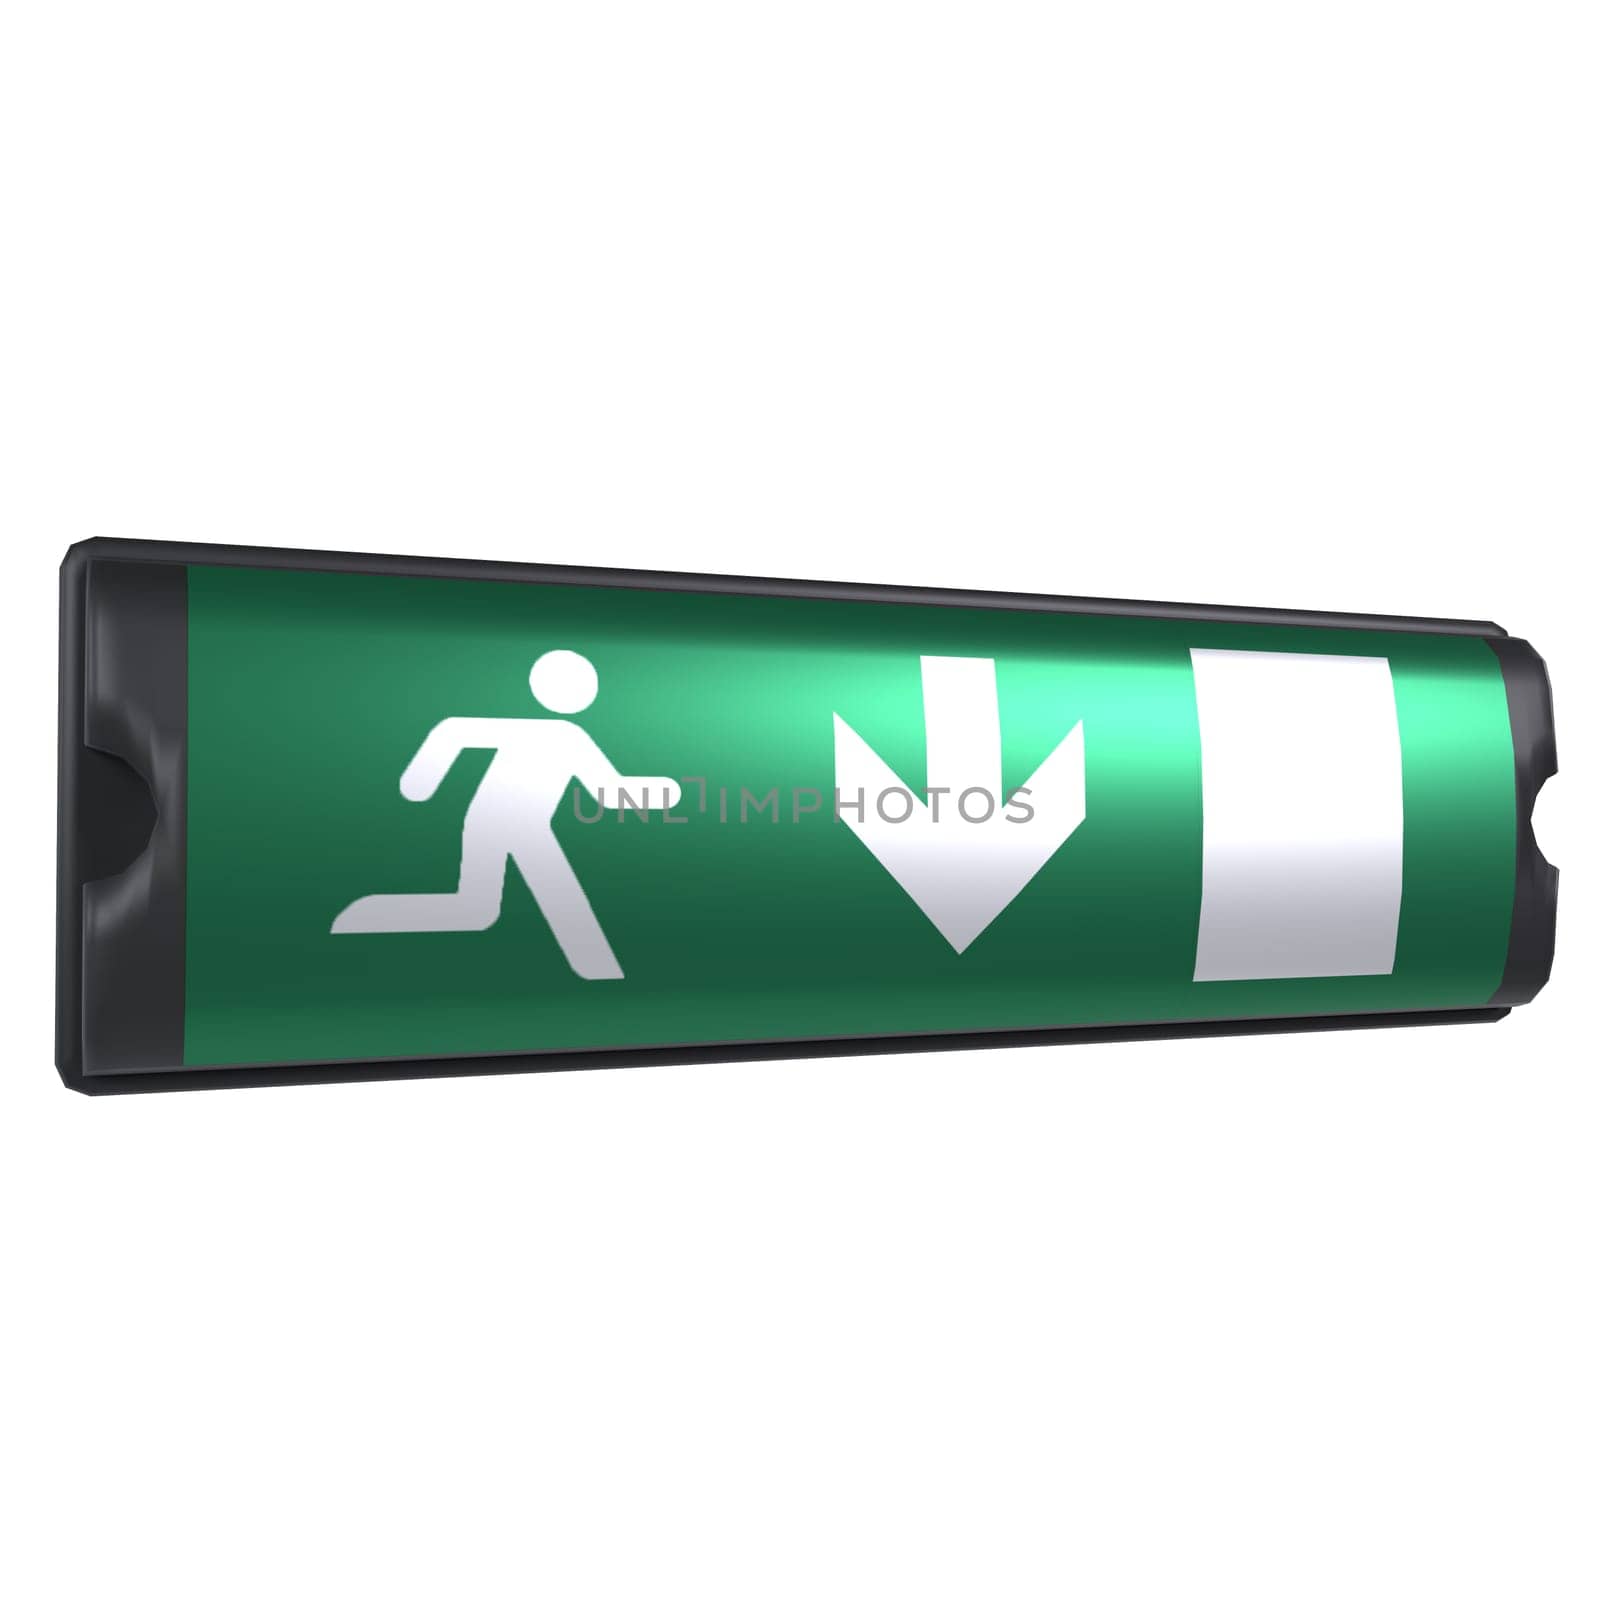 Emergency Exit isolated on white background. High quality 3d illustration